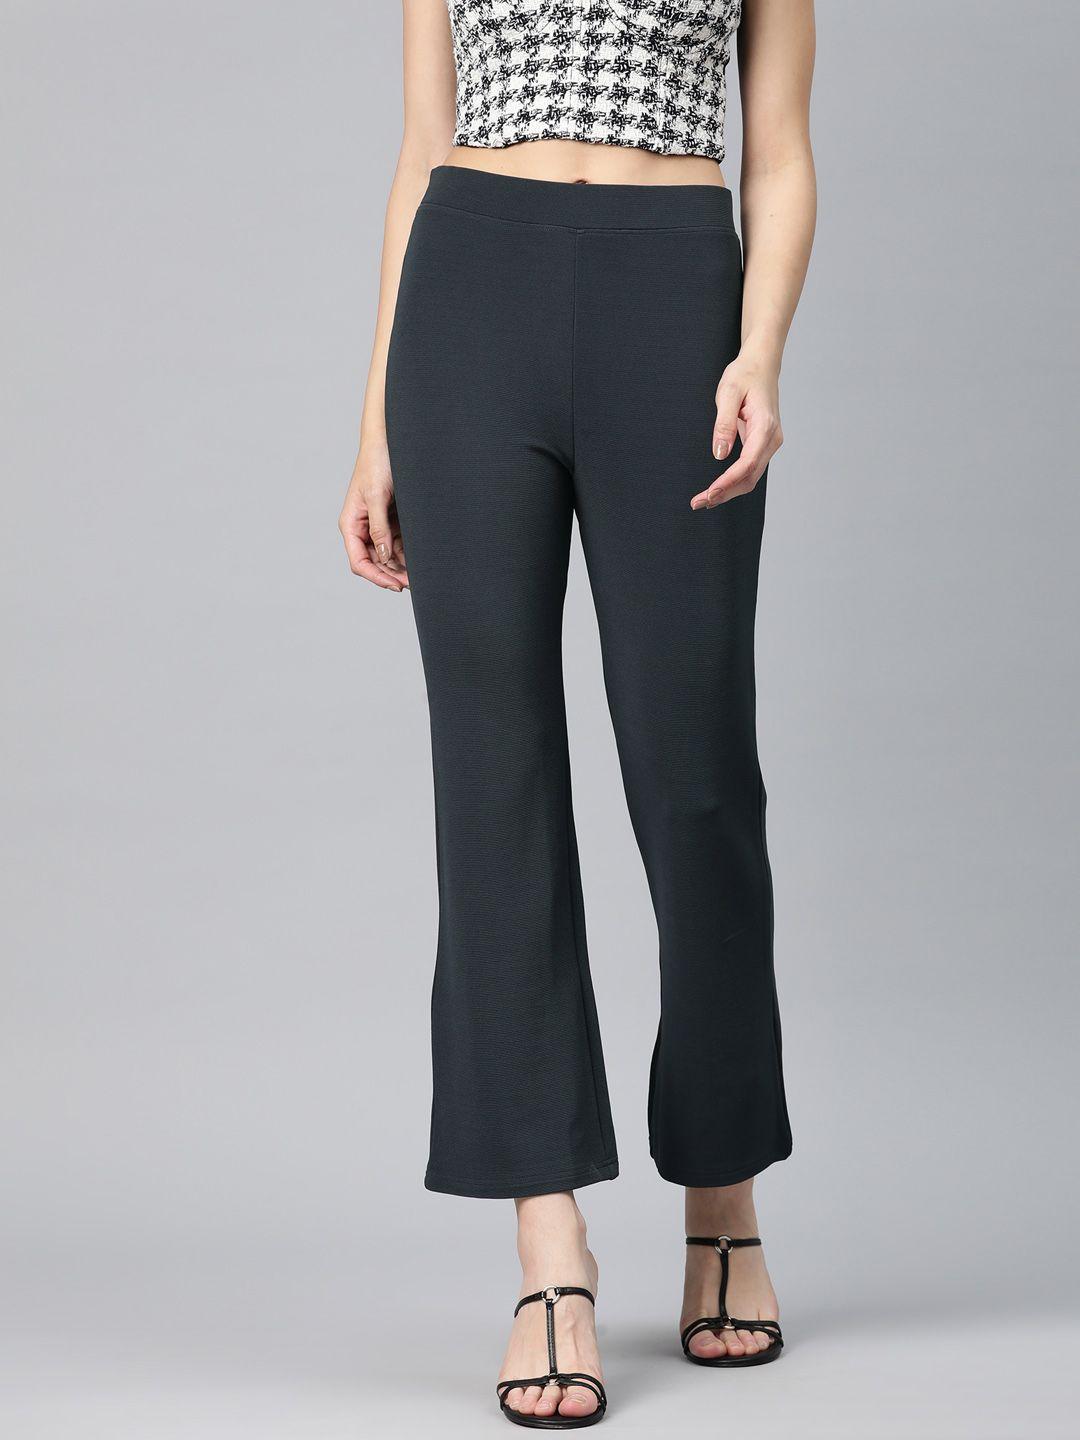 popnetic-women-slim-fit-high-rise-bootcut-trousers